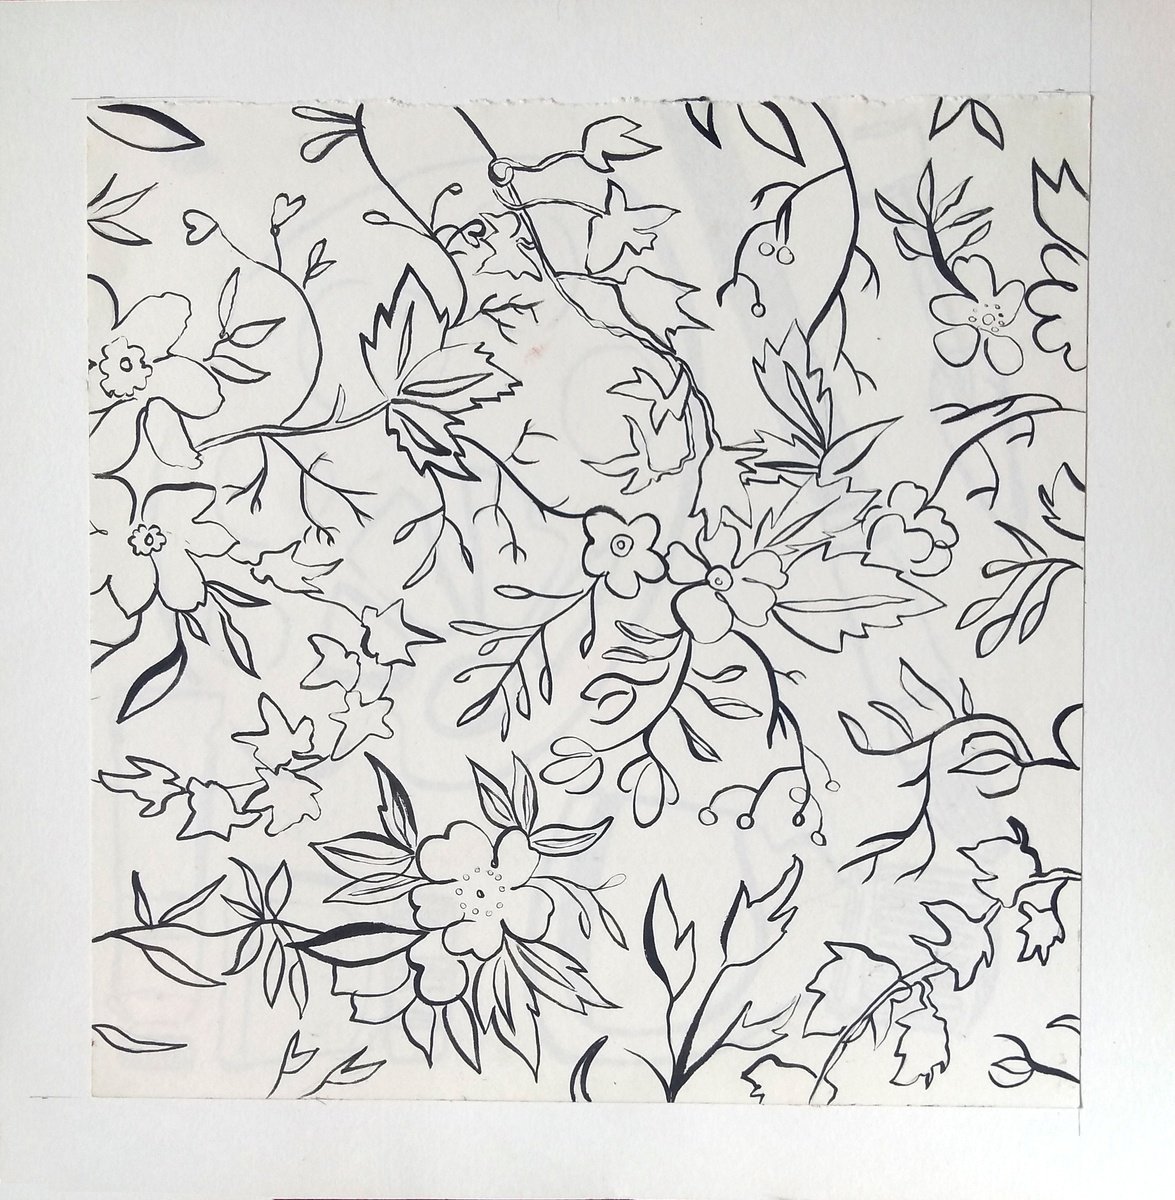 Floral pattern sketch by Hannah Clark